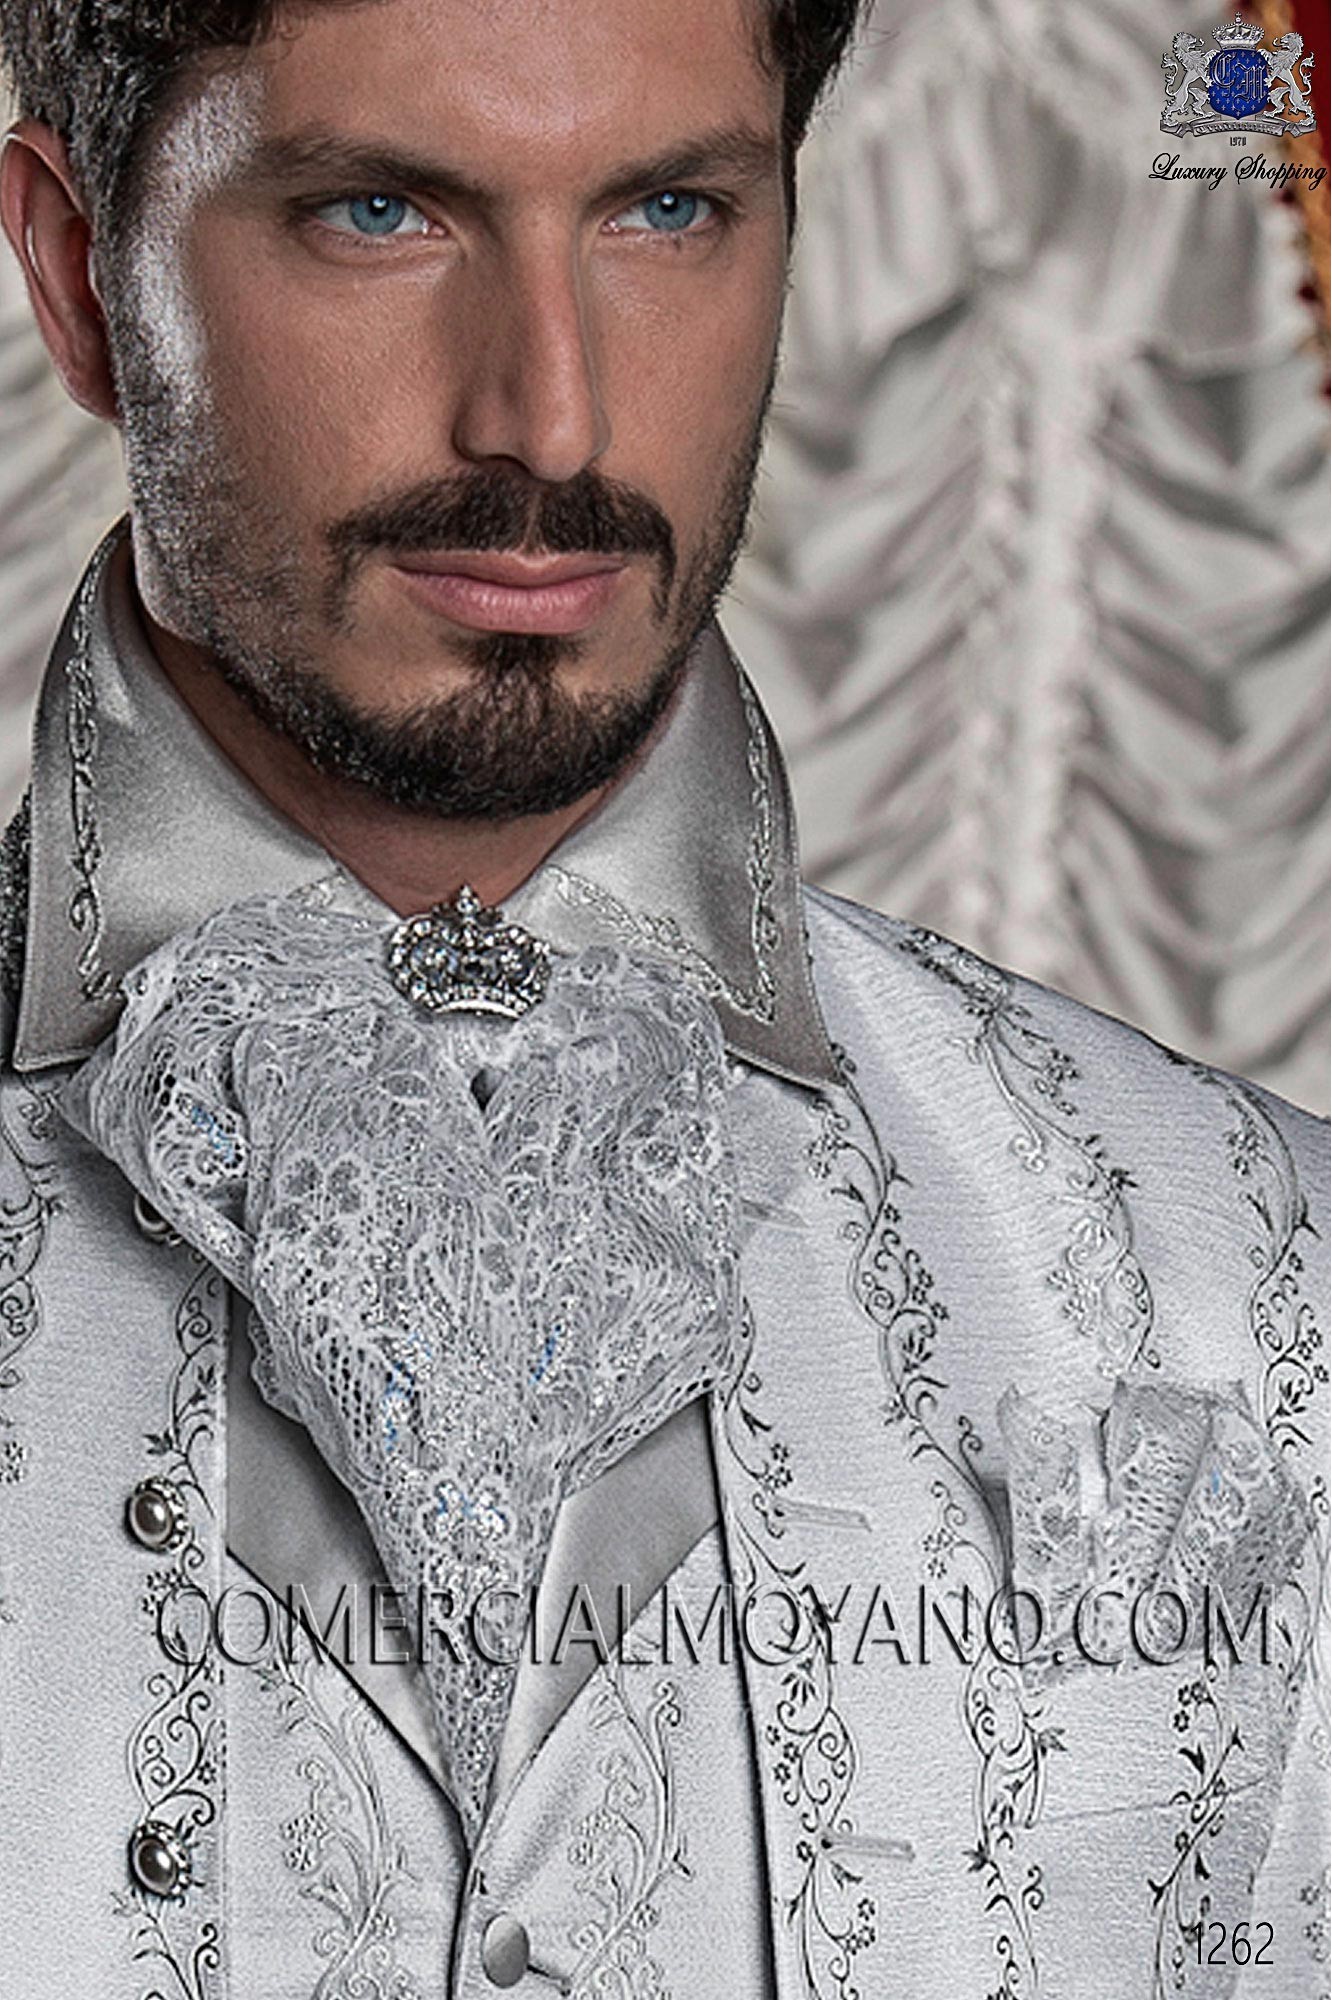 White-silver lace plastron tie with handkerchief, ON